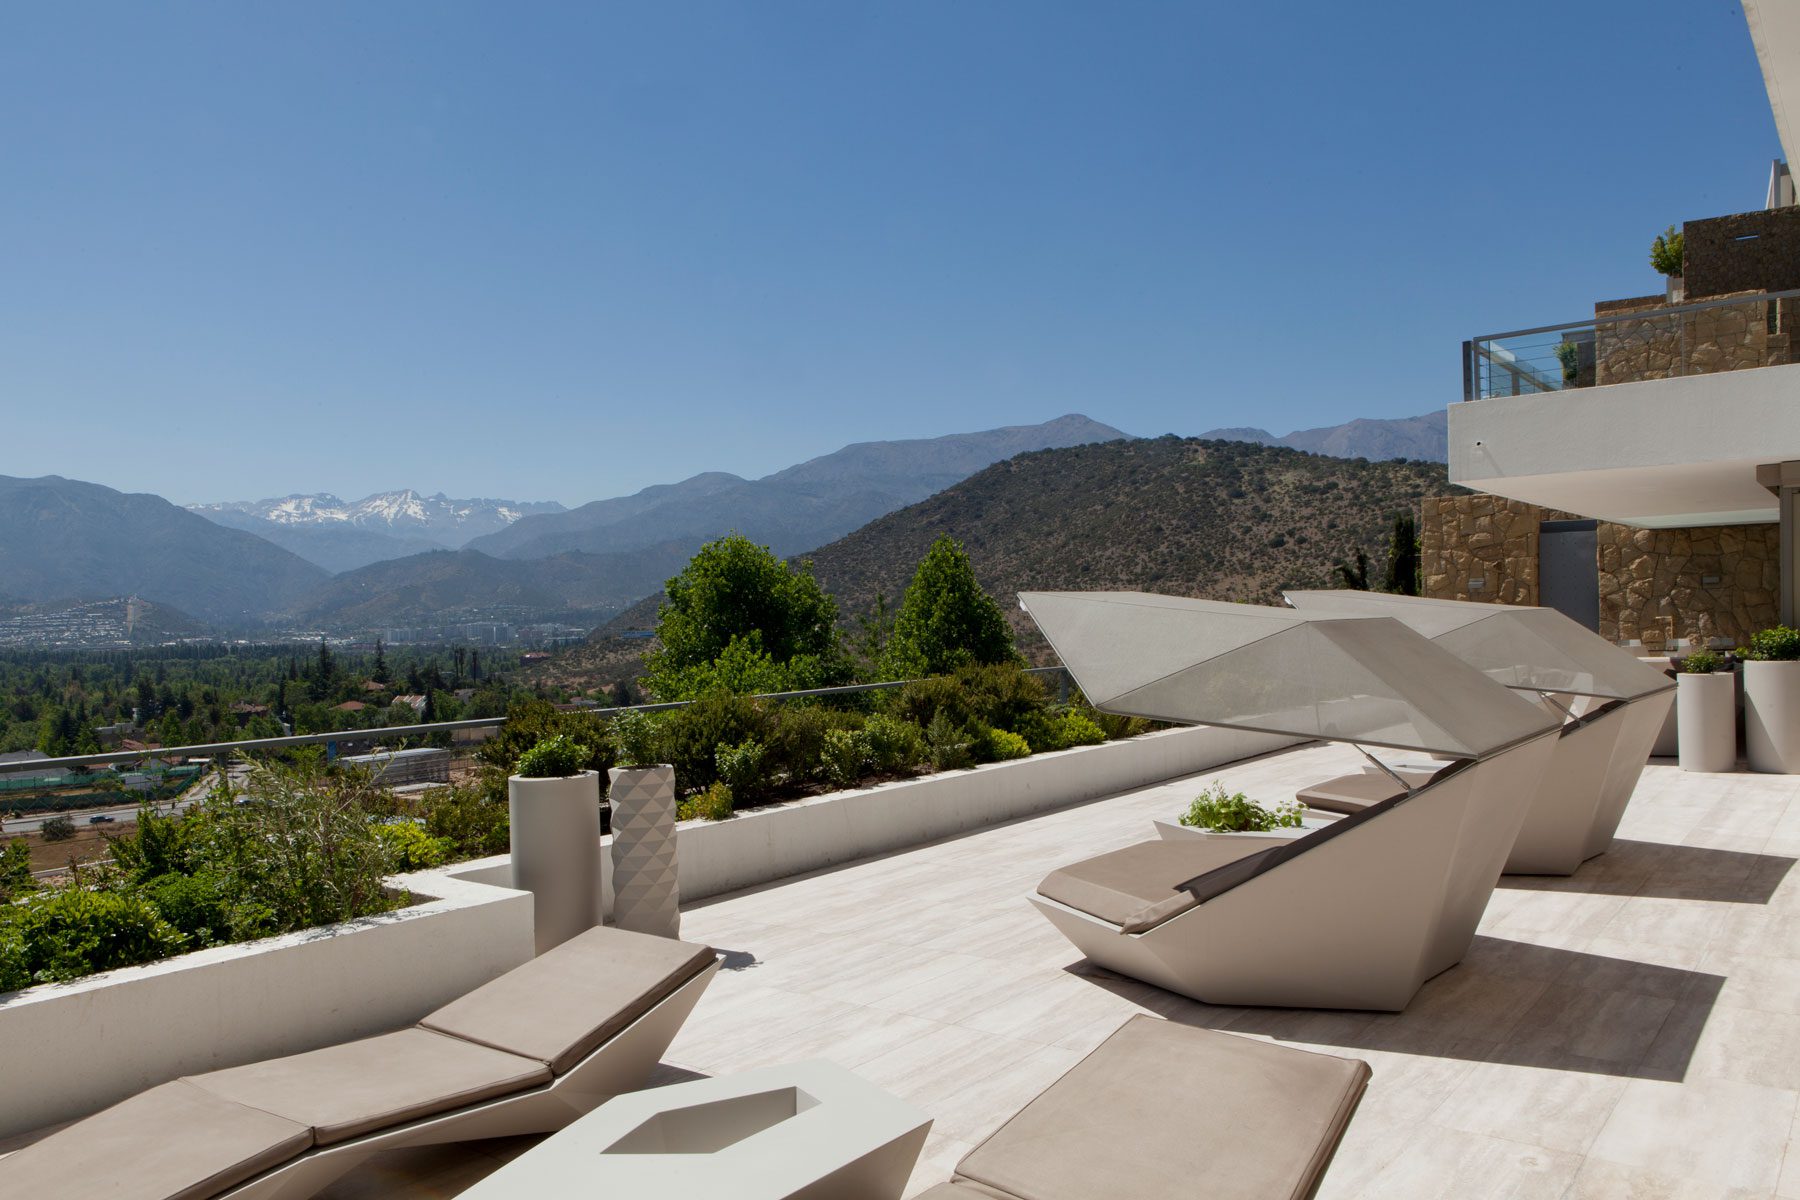 A terrace to the mountains